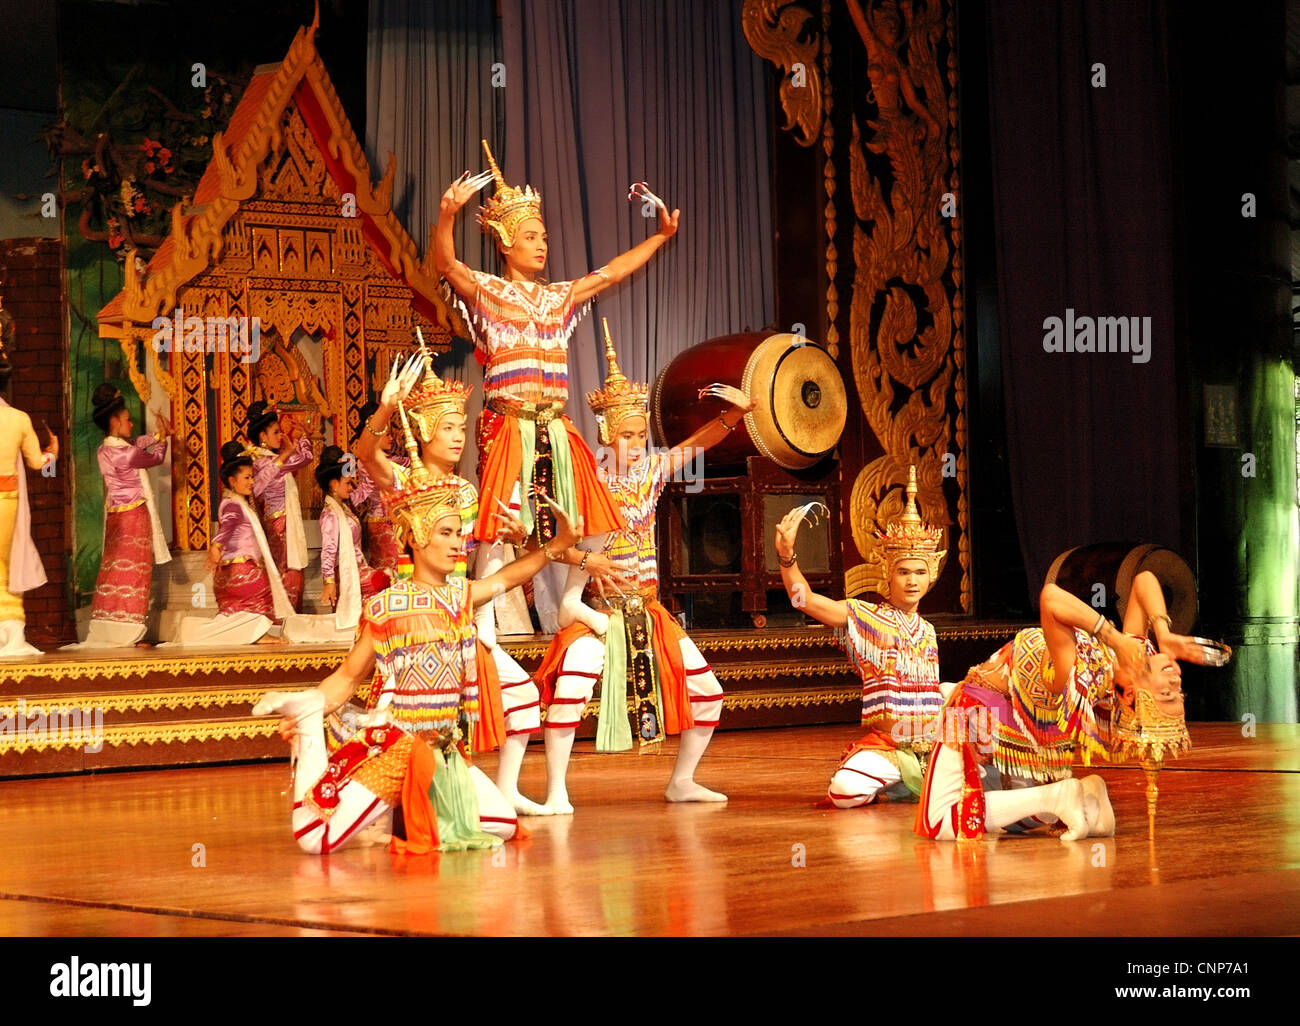 The famous Thai Culture and traditional dances show in Nong Nooch tropical garden, Pattaya, Thailand. Stock Photo